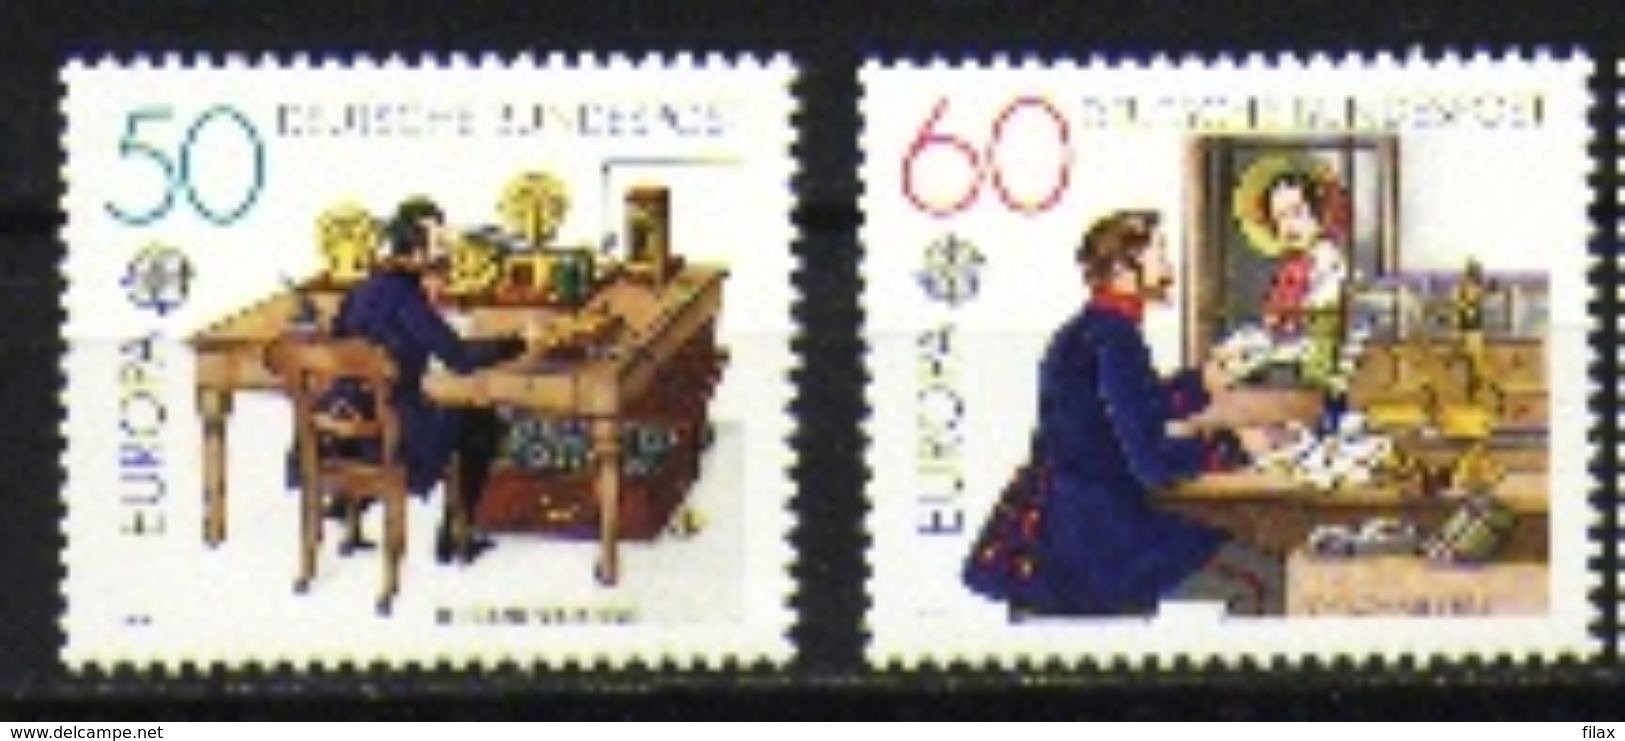 LOT EU01  - EUROPA (Different years) - Germany